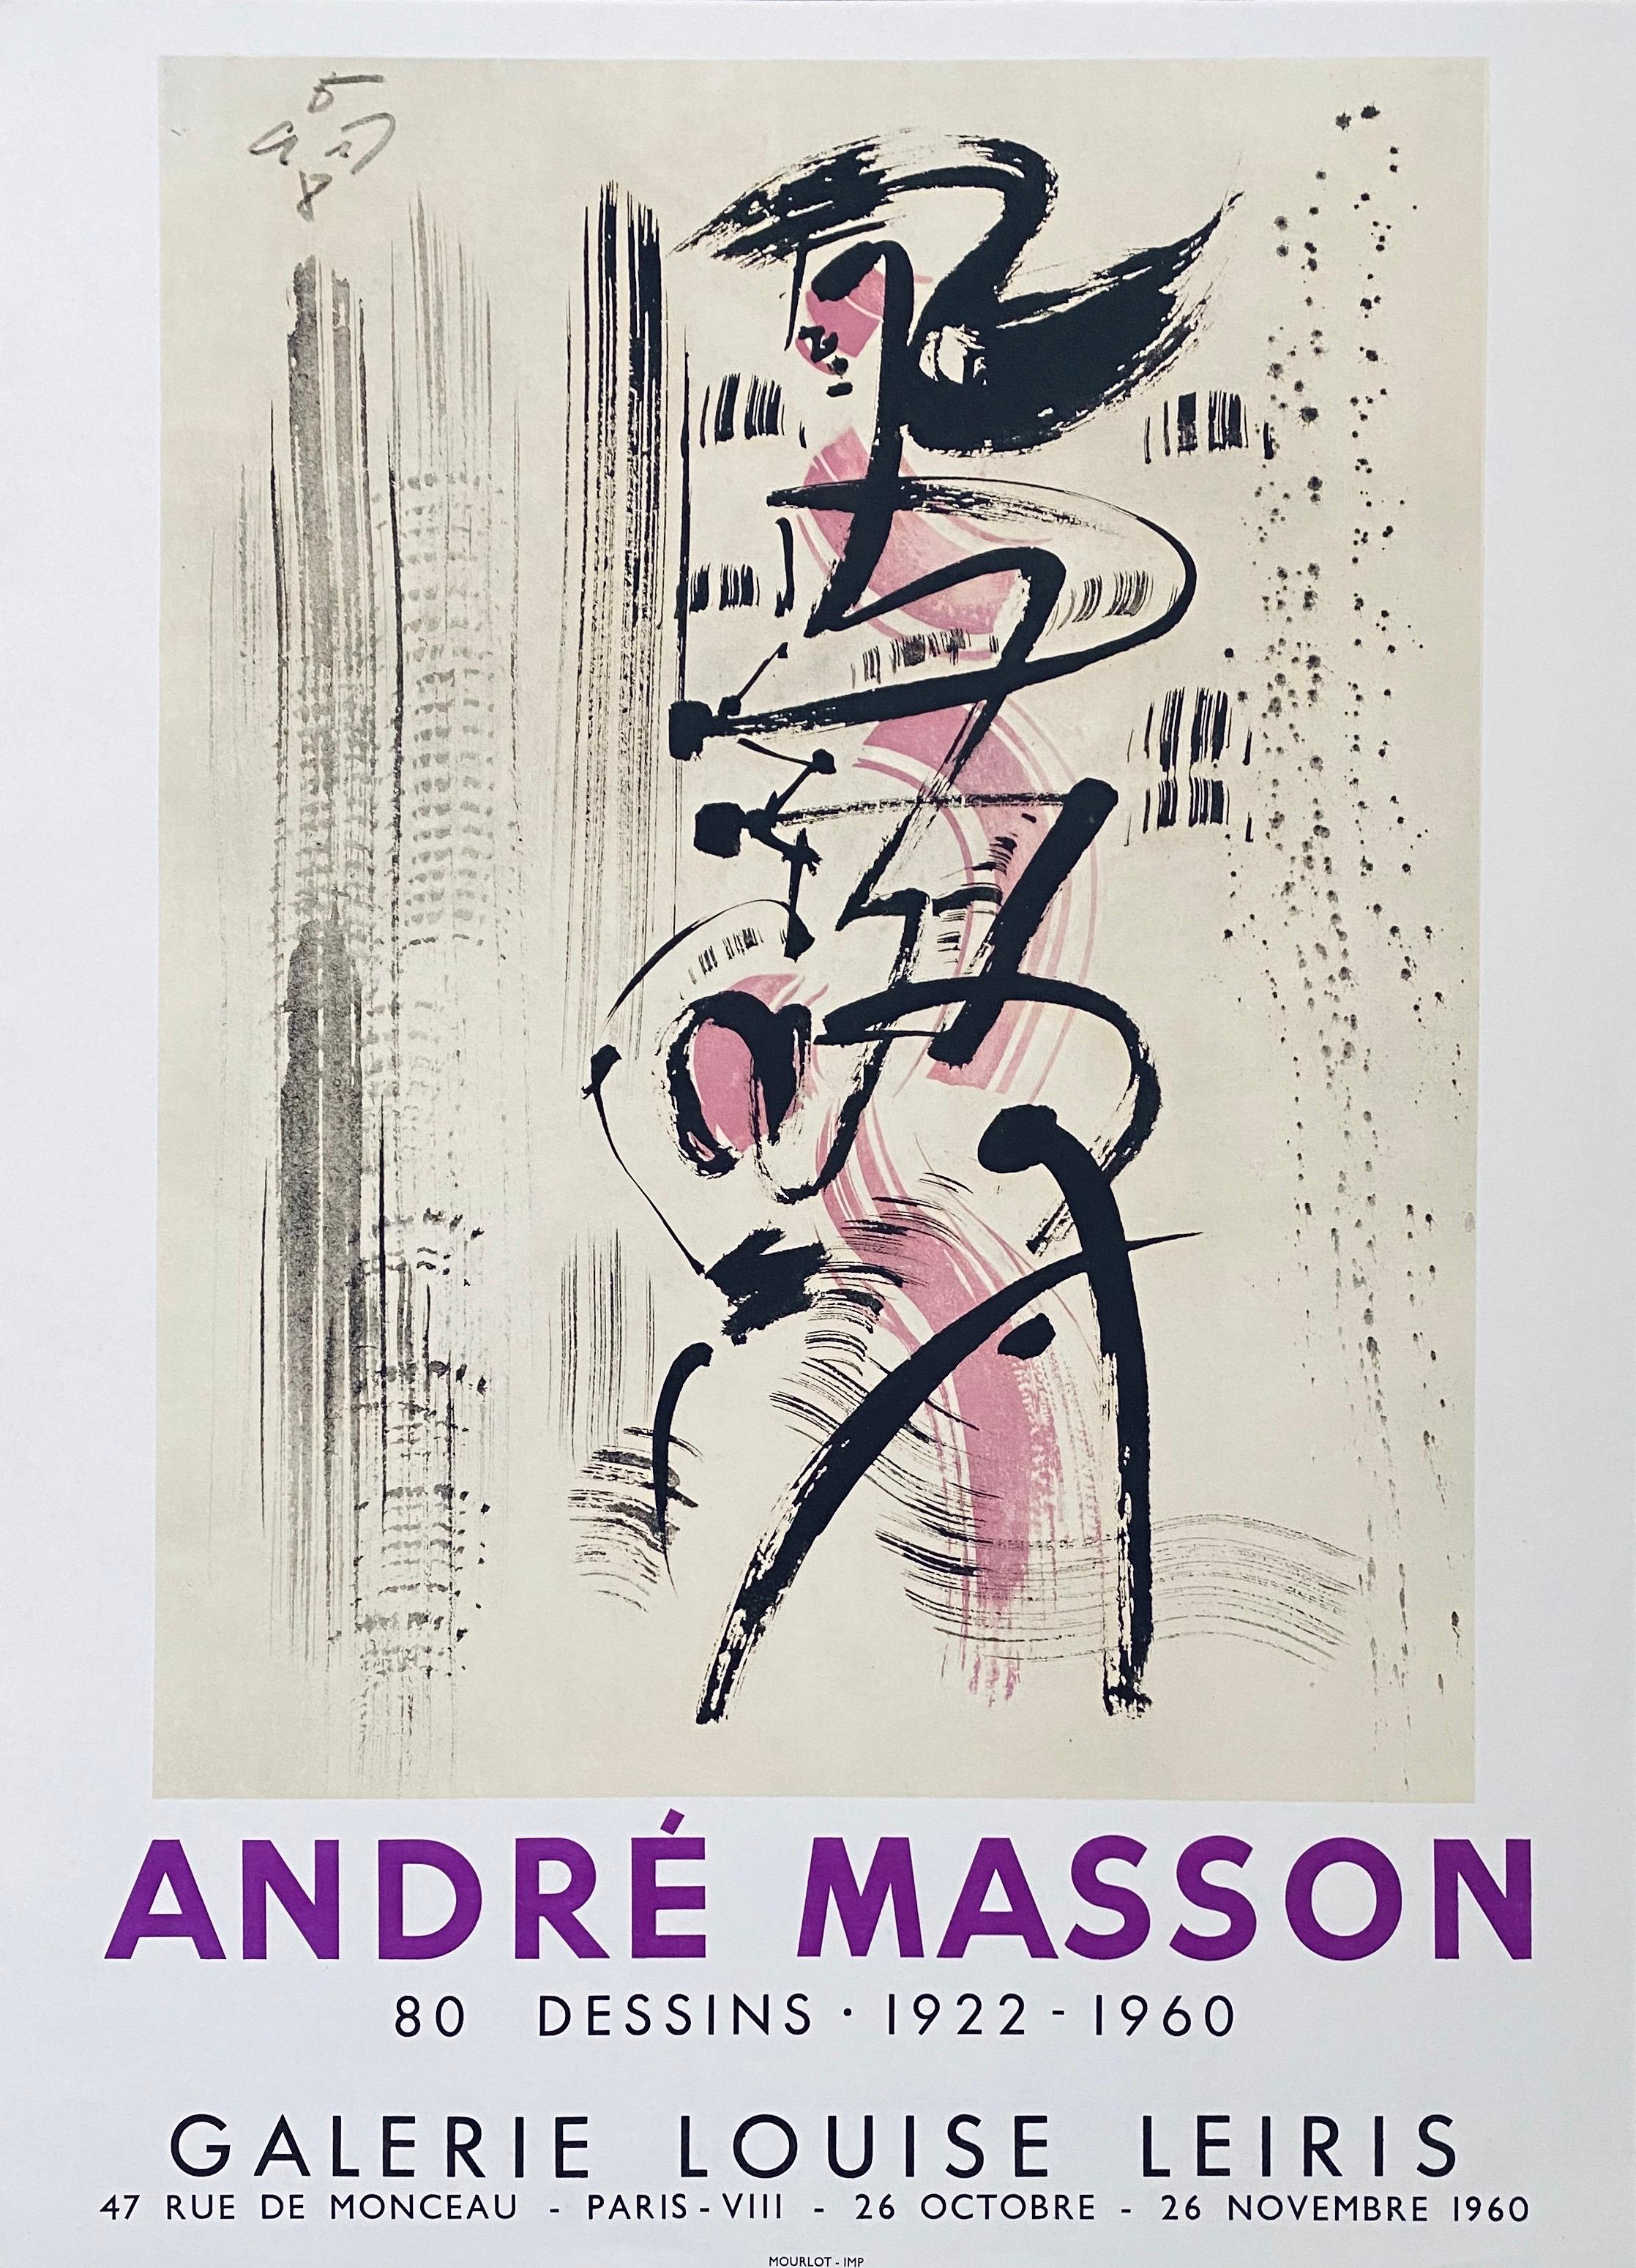 French Abstract Surrealist Vintage Lithograph Mourlot Poster Andre Masson - Print by André Masson